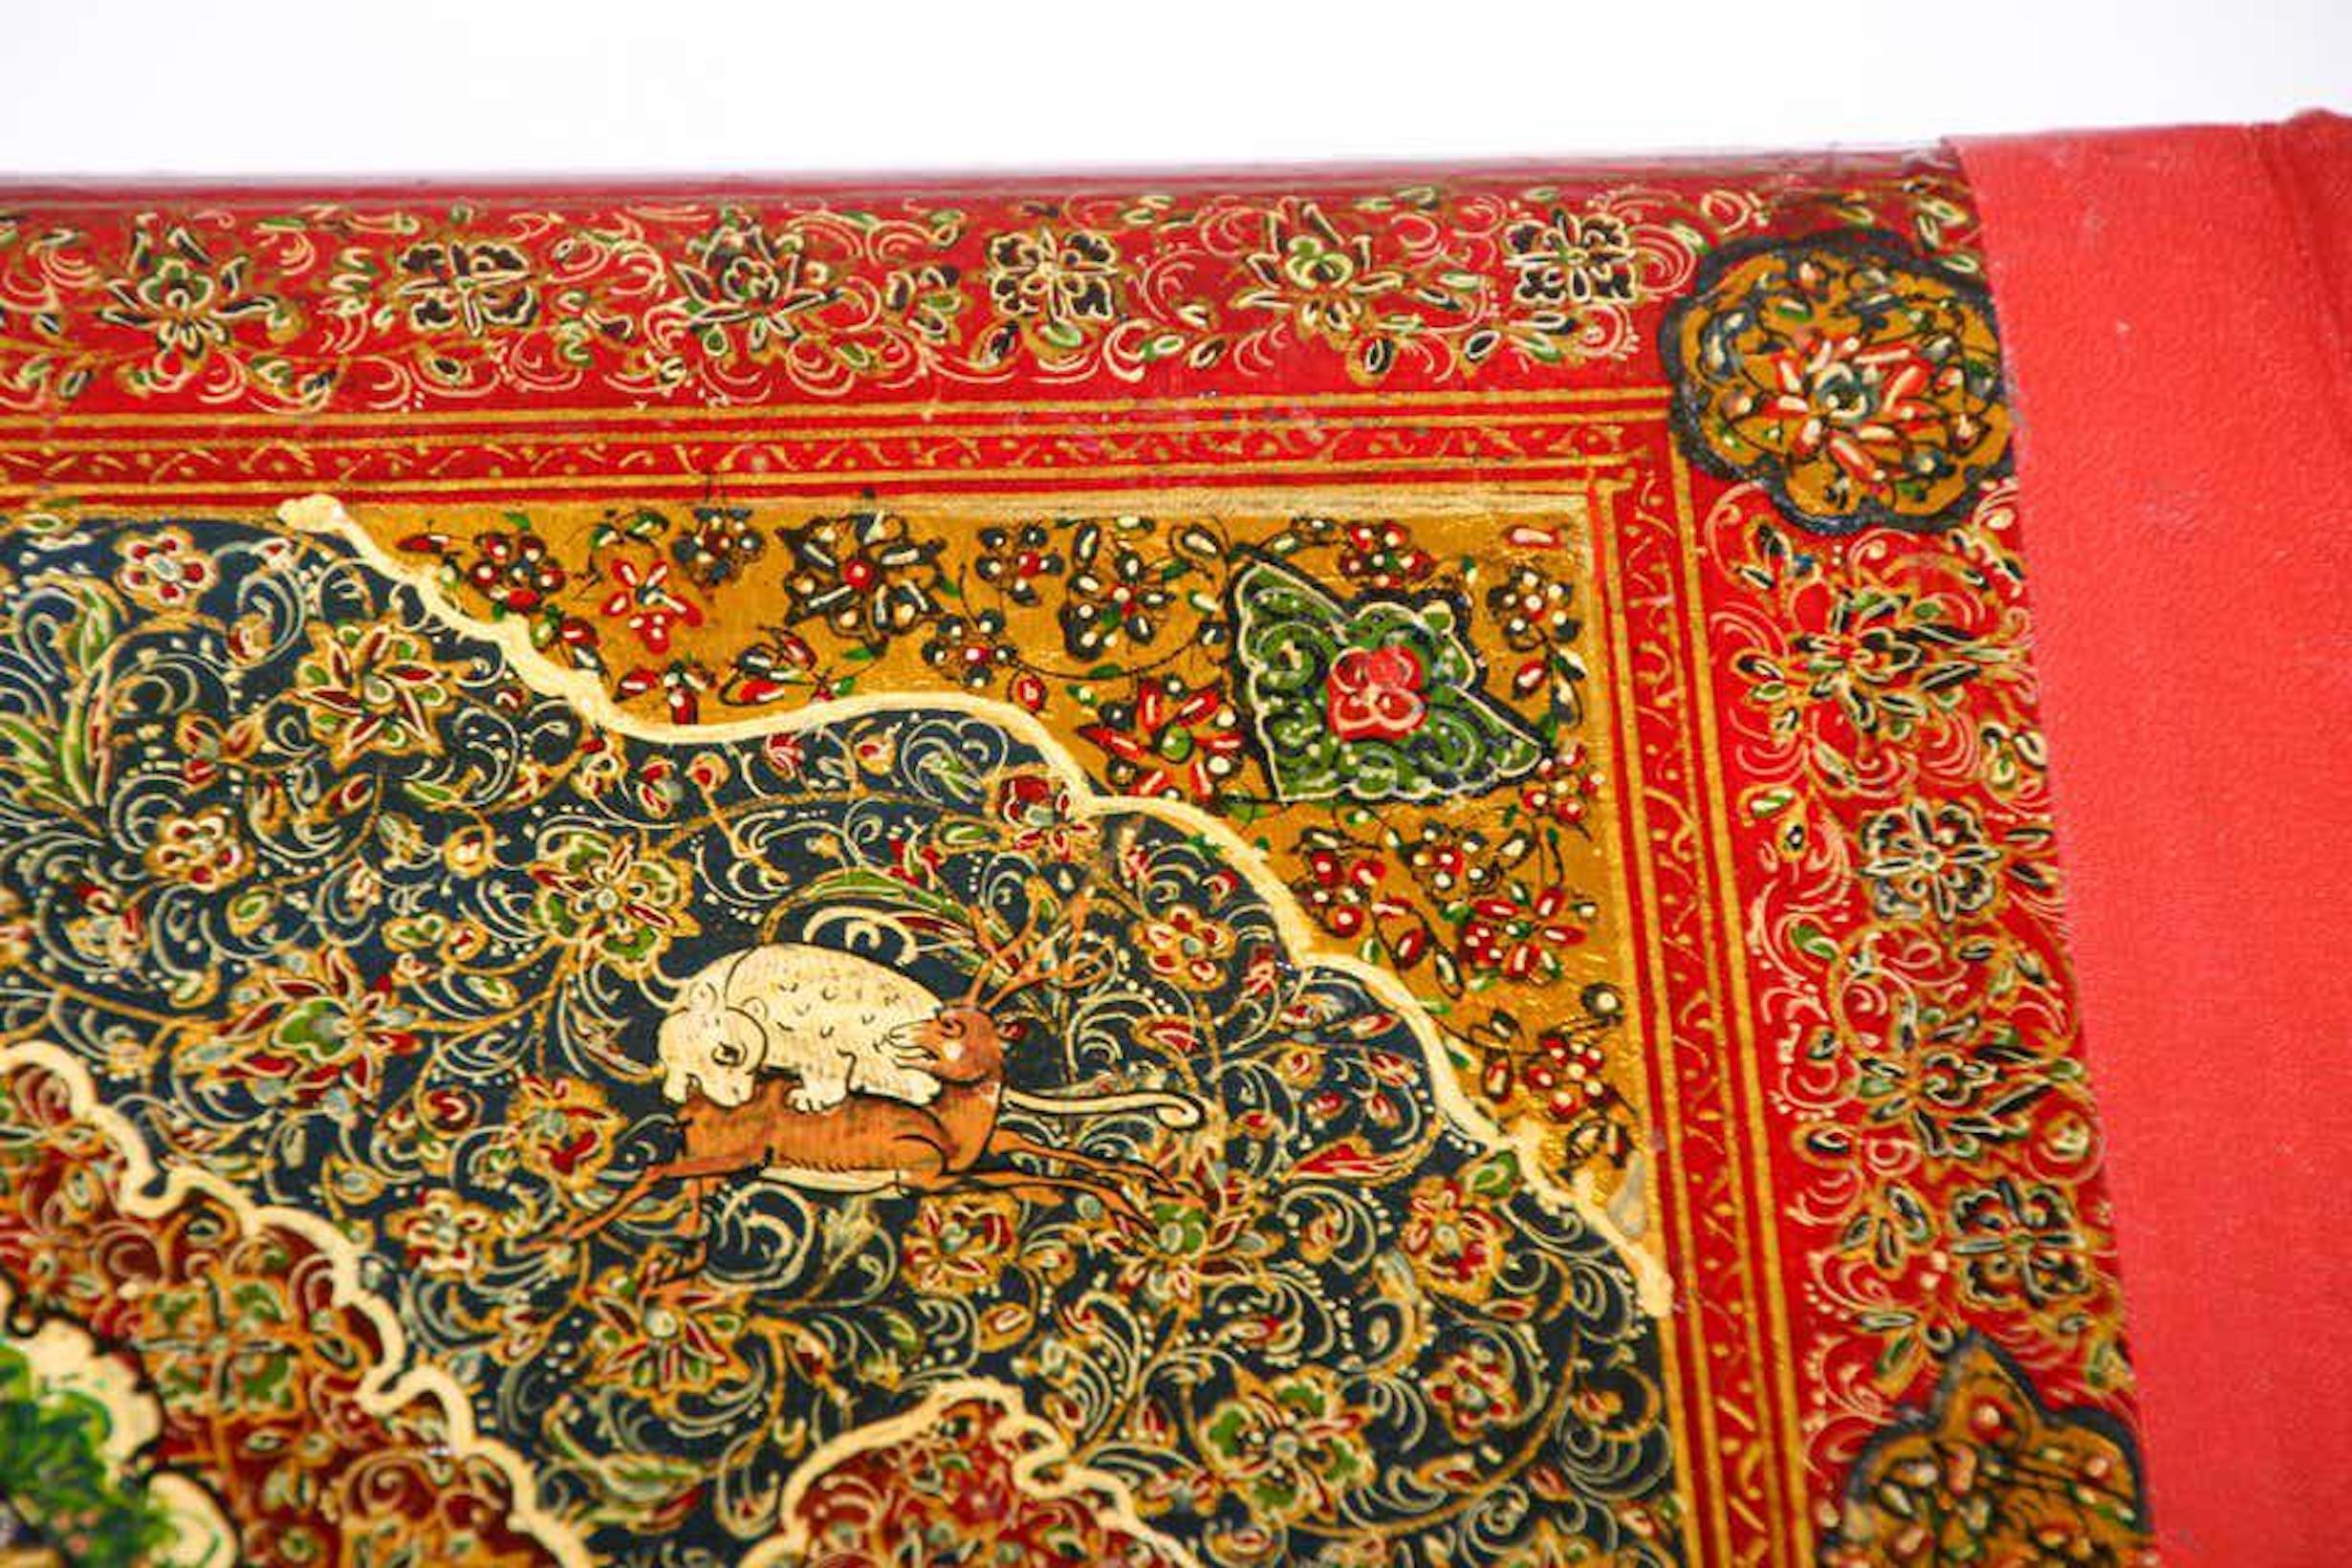 Hand Painted Middle Eastern Moorish Style Photo Album, 19th Century For Sale 5